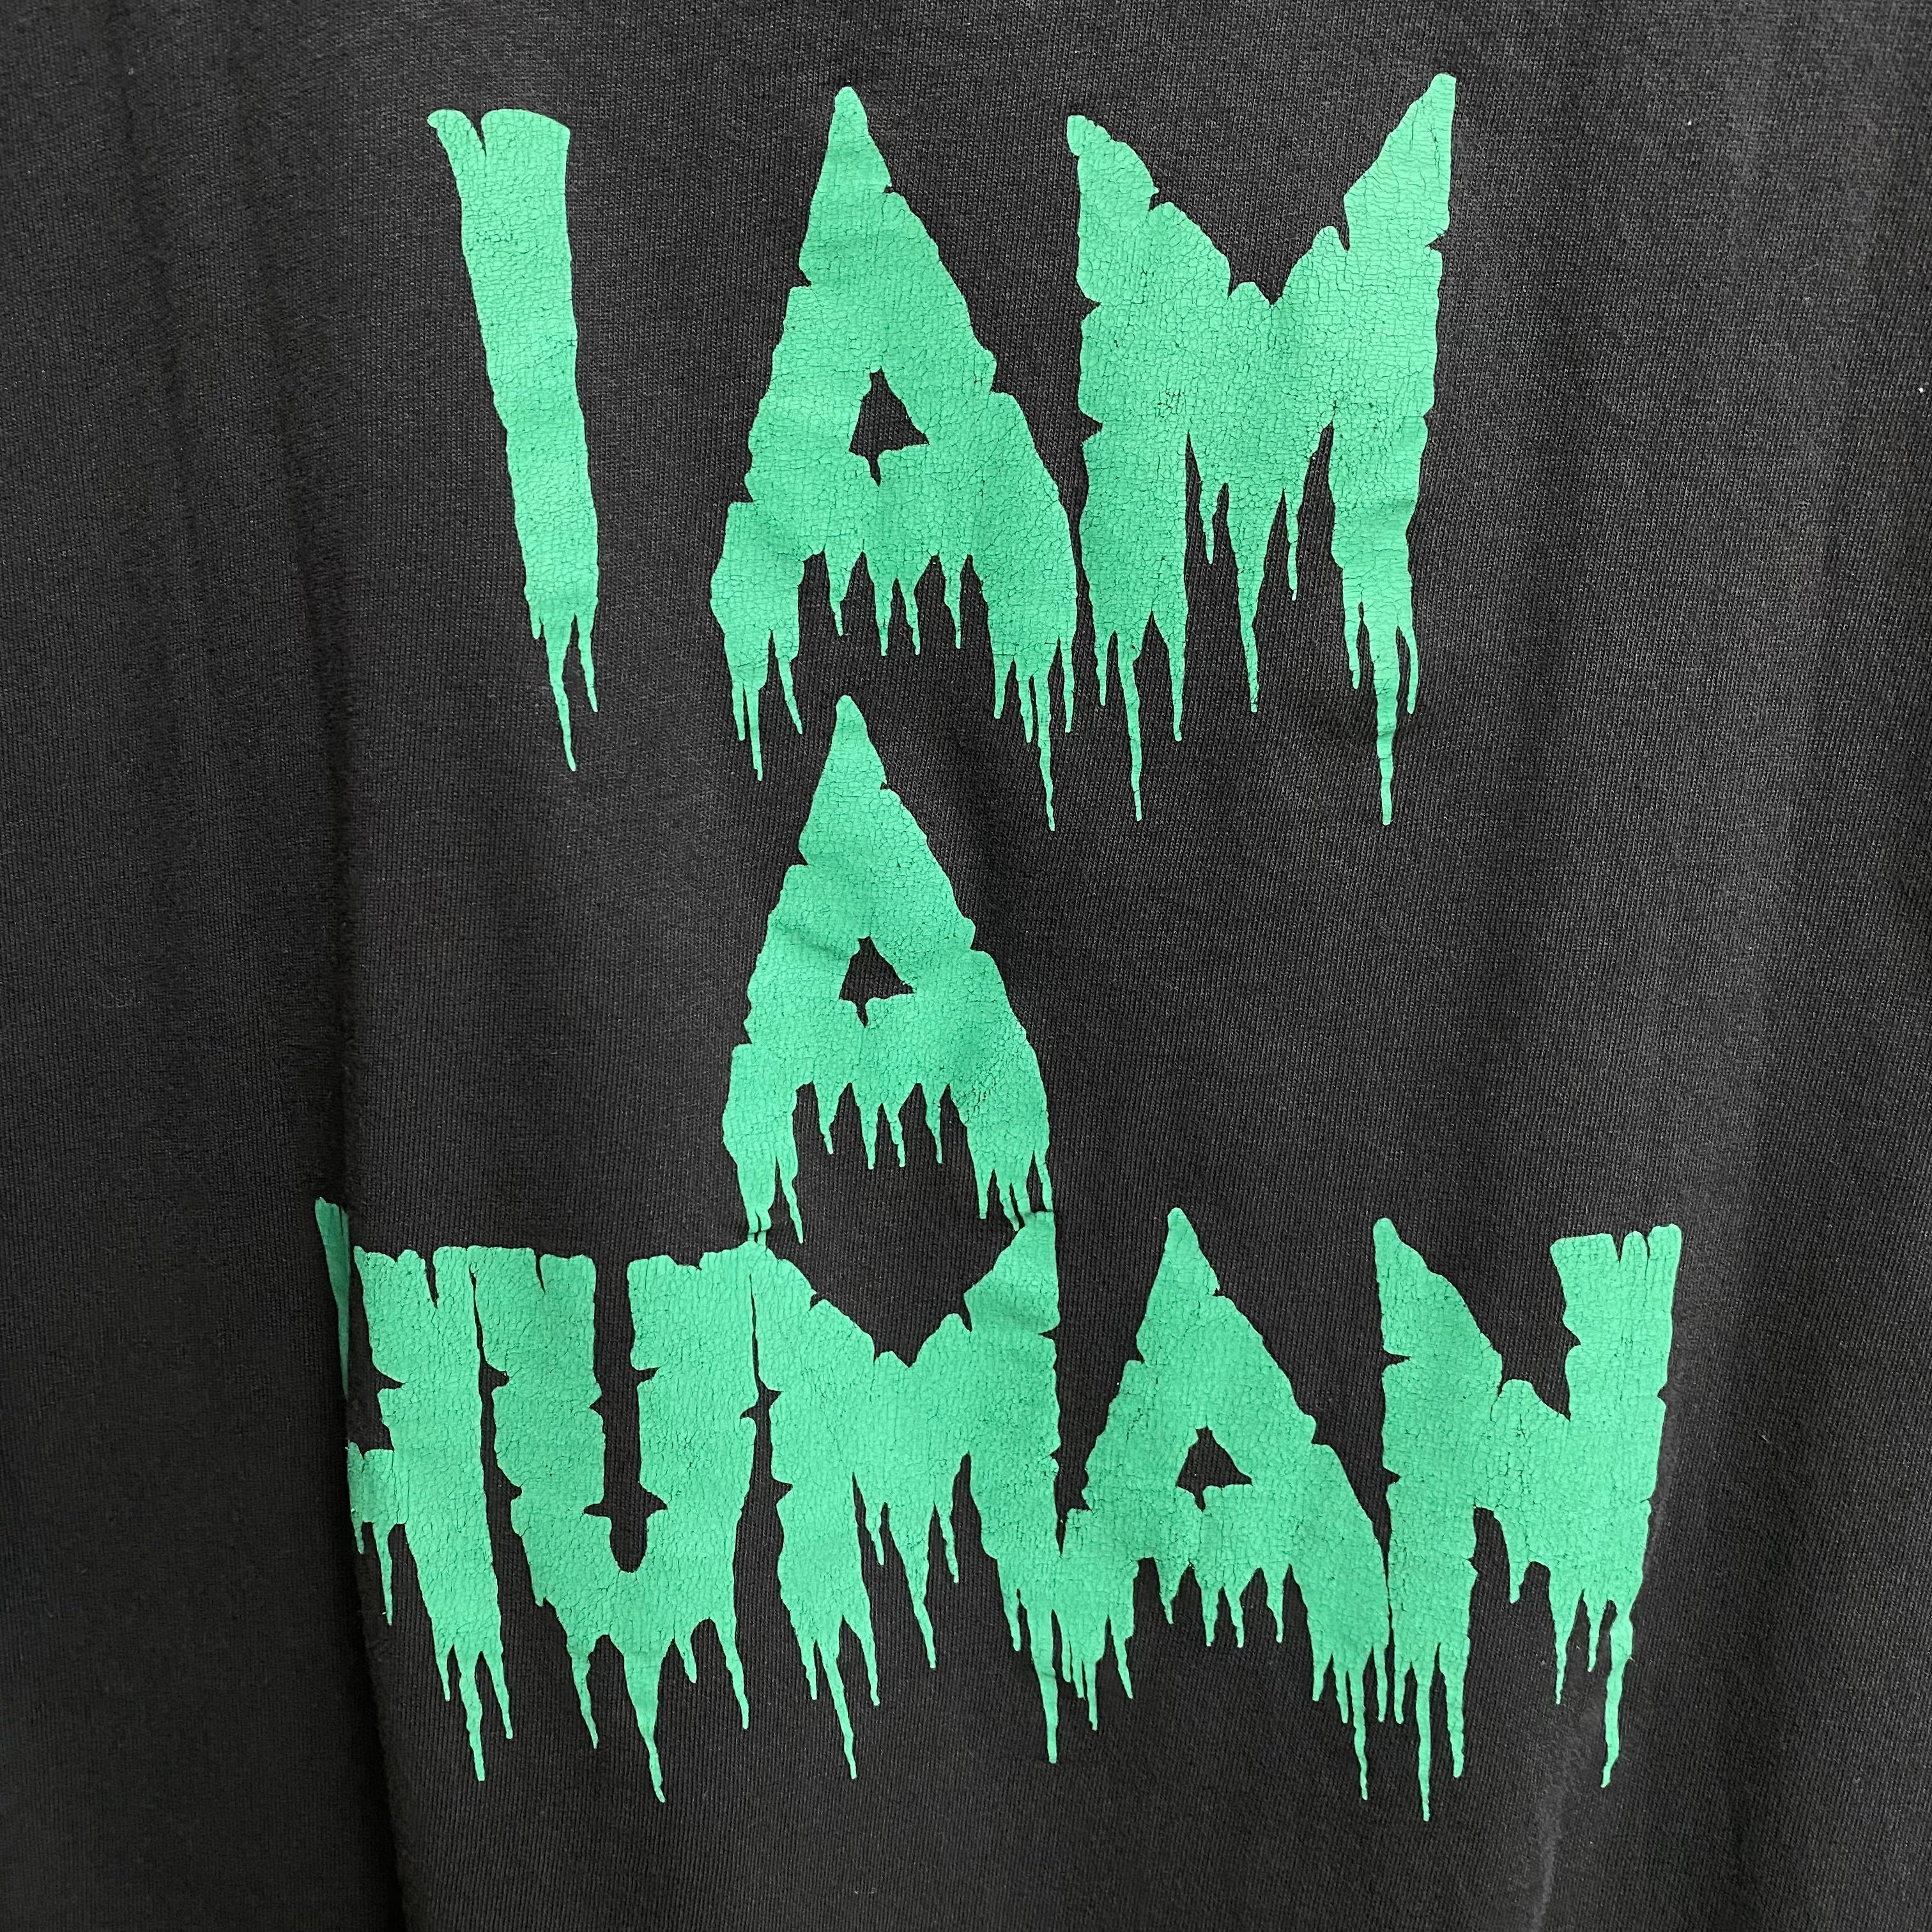 LOCALS ONLY  I AM A HUMAN  S/S TEE  / LOCALS ONLY